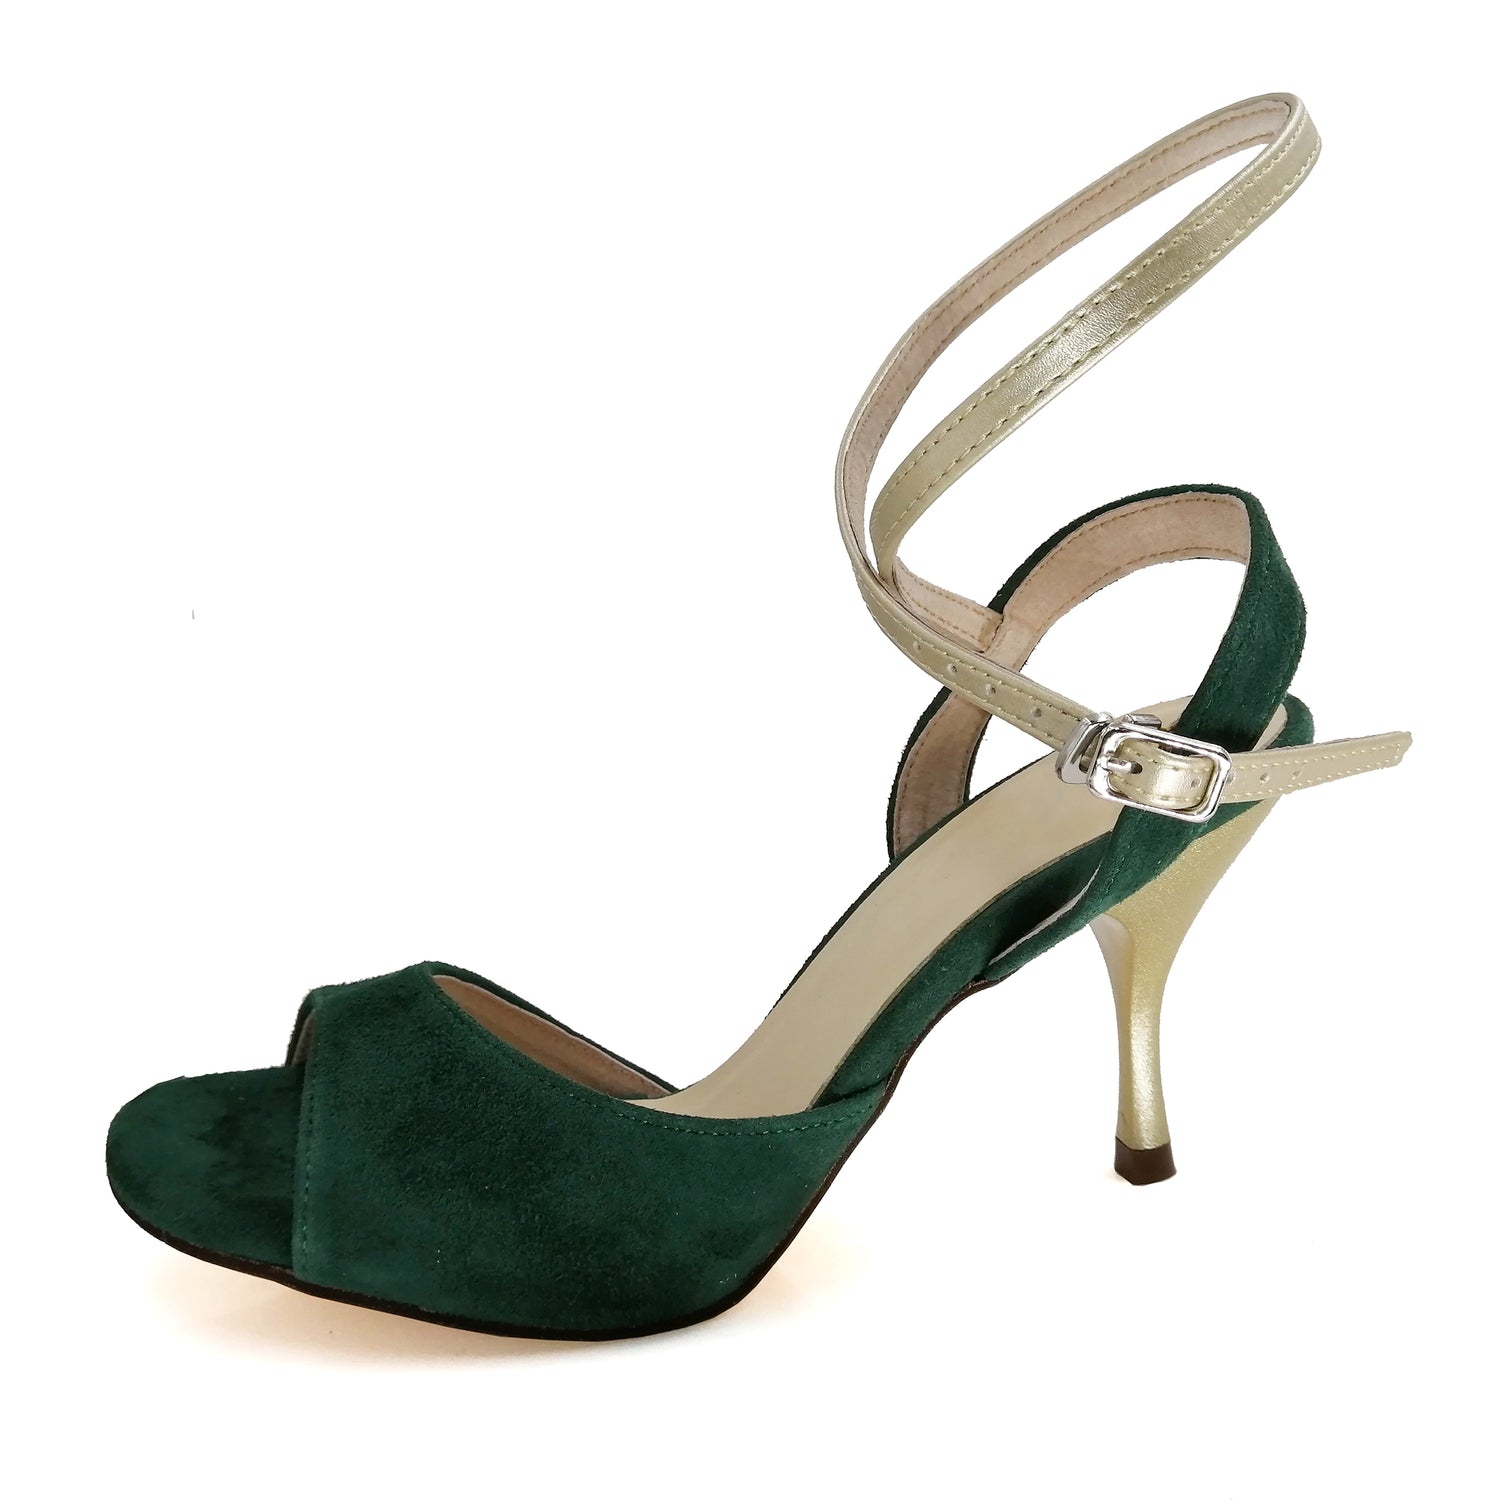 Pro Dancer Argentine Tango Shoes with Leather Sole and Dark Green Heels0